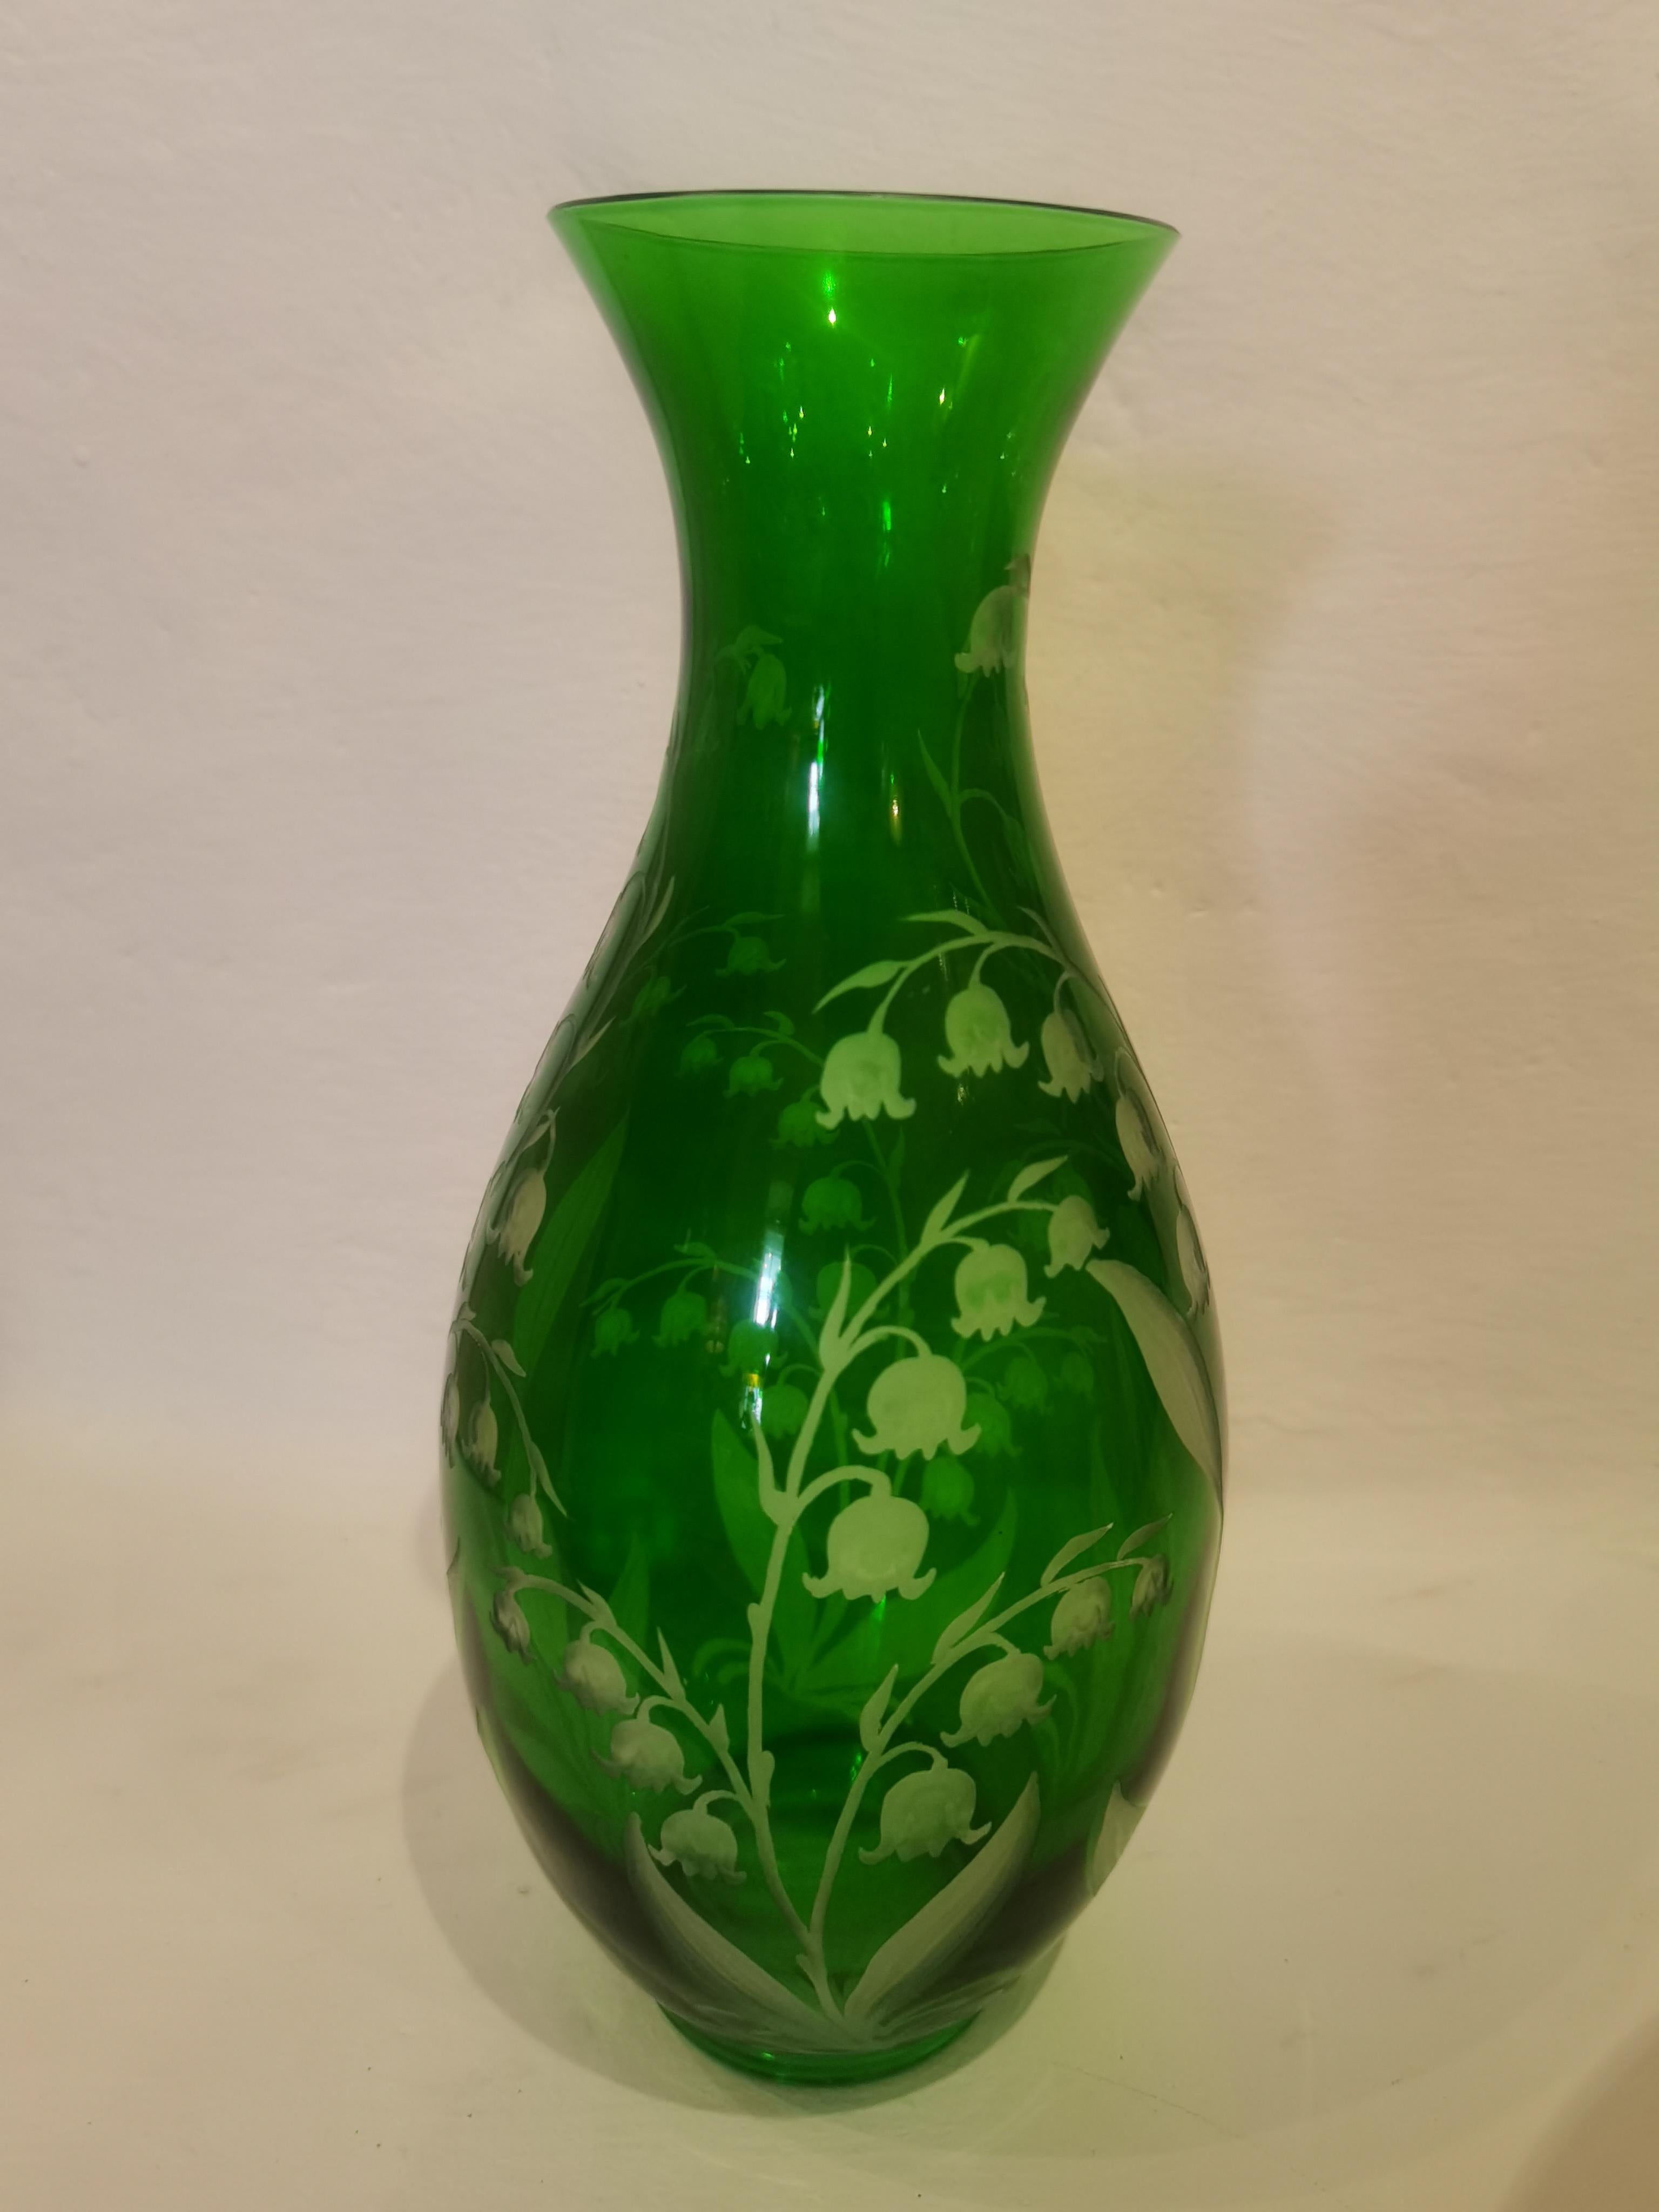 Hand blown carafe in green crystal with a charming lily of the valley decor all around.
About Sofina crystal:
Sofina crystal was established in 2013 in Bavaria/Germany and stands for traditional craftsmanship in the tradition of the 18th century.